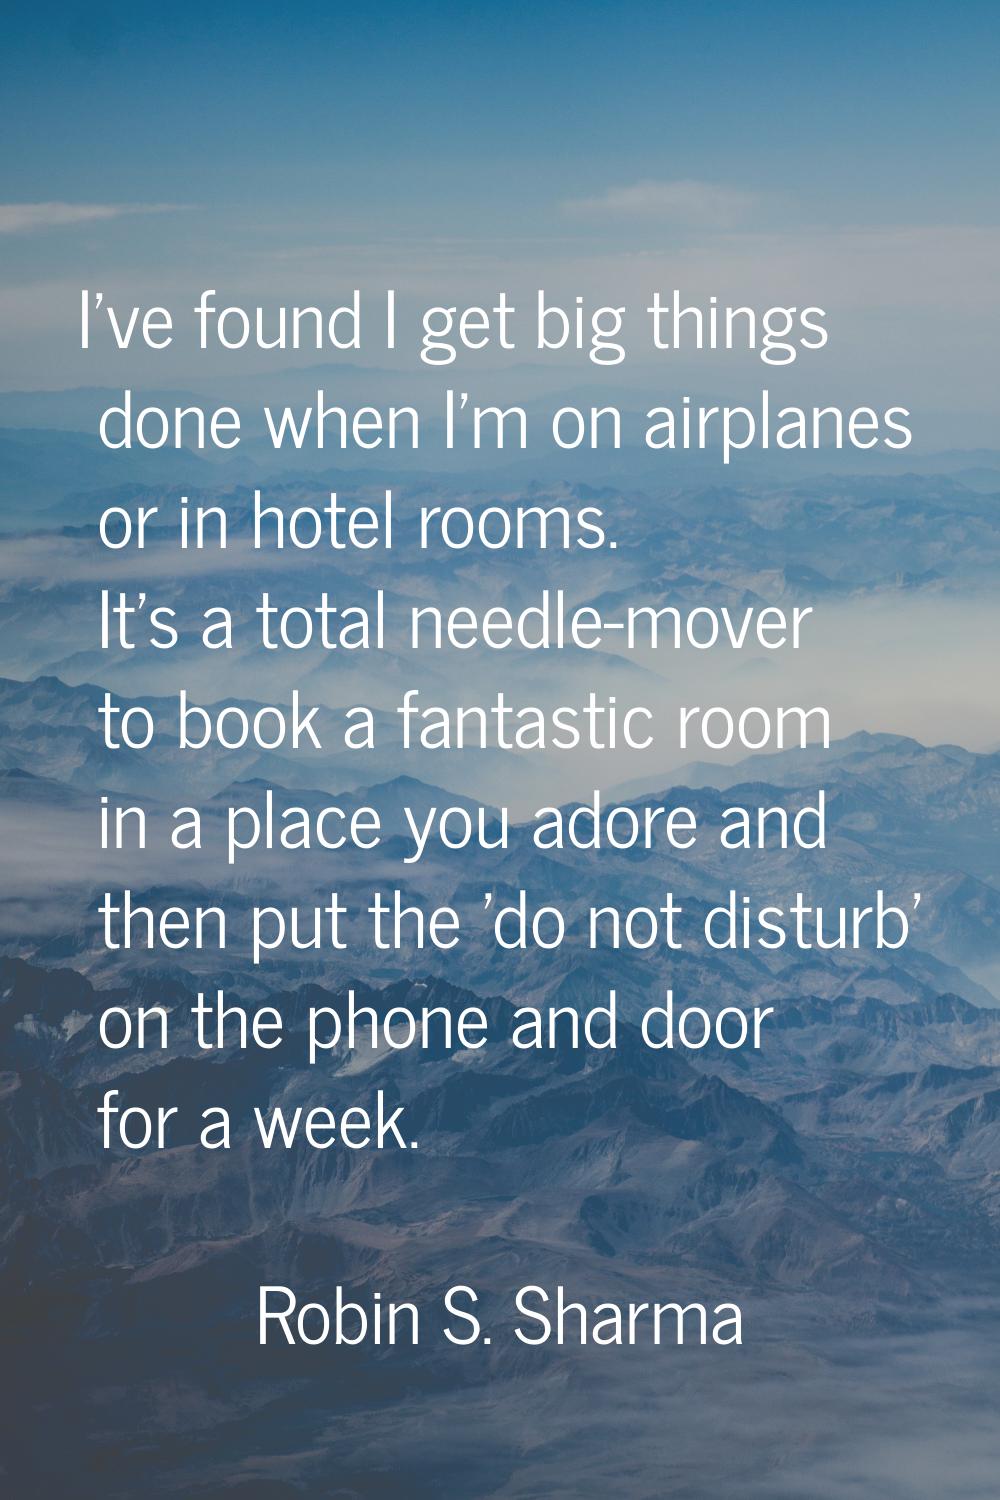 I've found I get big things done when I'm on airplanes or in hotel rooms. It's a total needle-mover